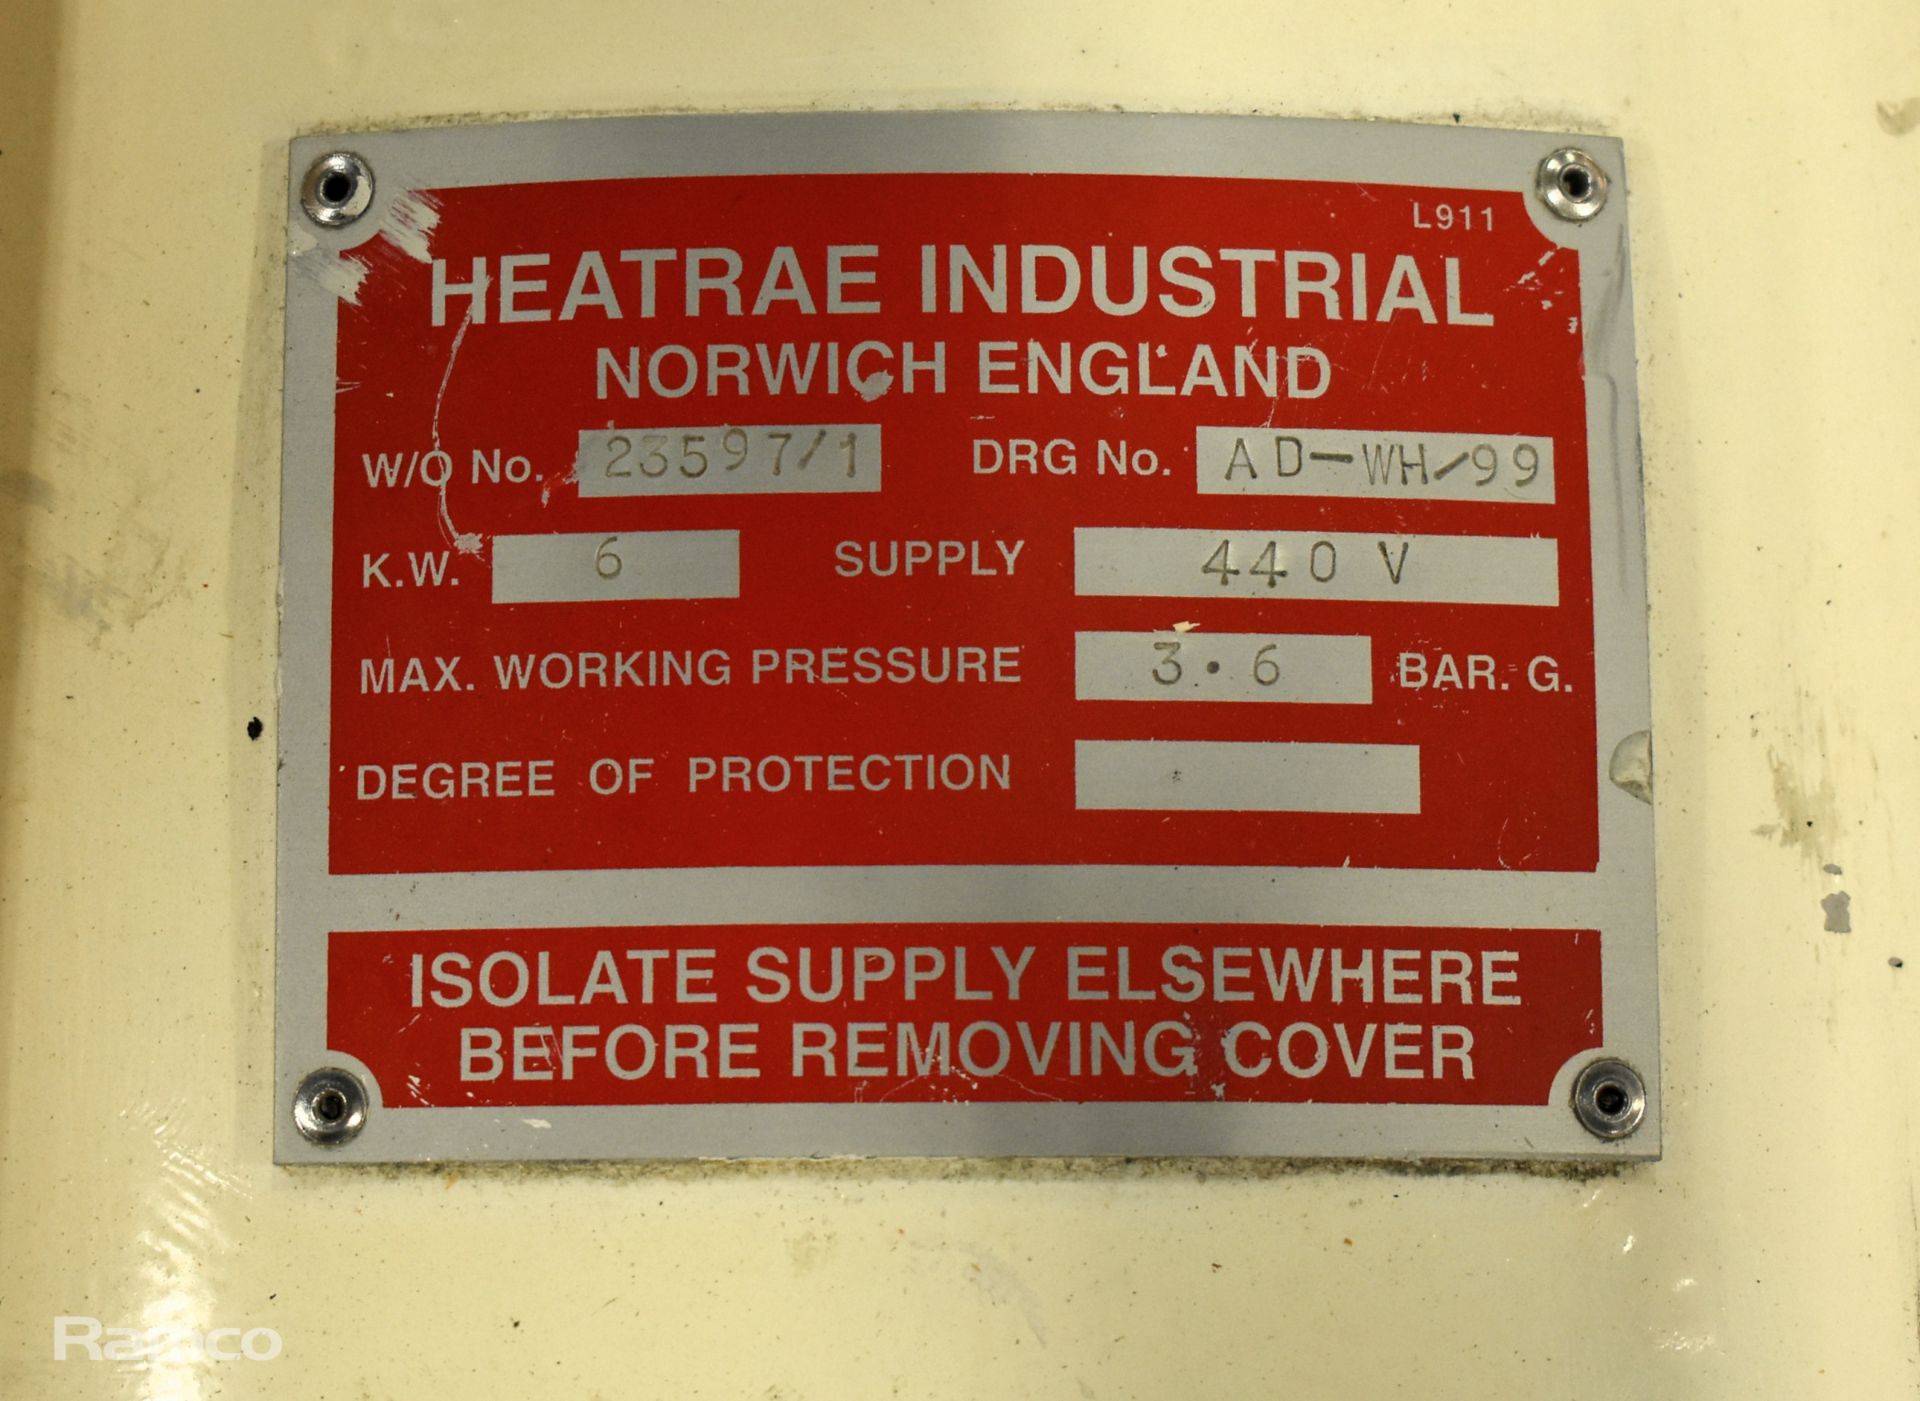 Heatrae Industrial AD-WH-99 electric water heater - 440V - 6 kW - W 370 x D 470 x H 1050mm - Image 3 of 4